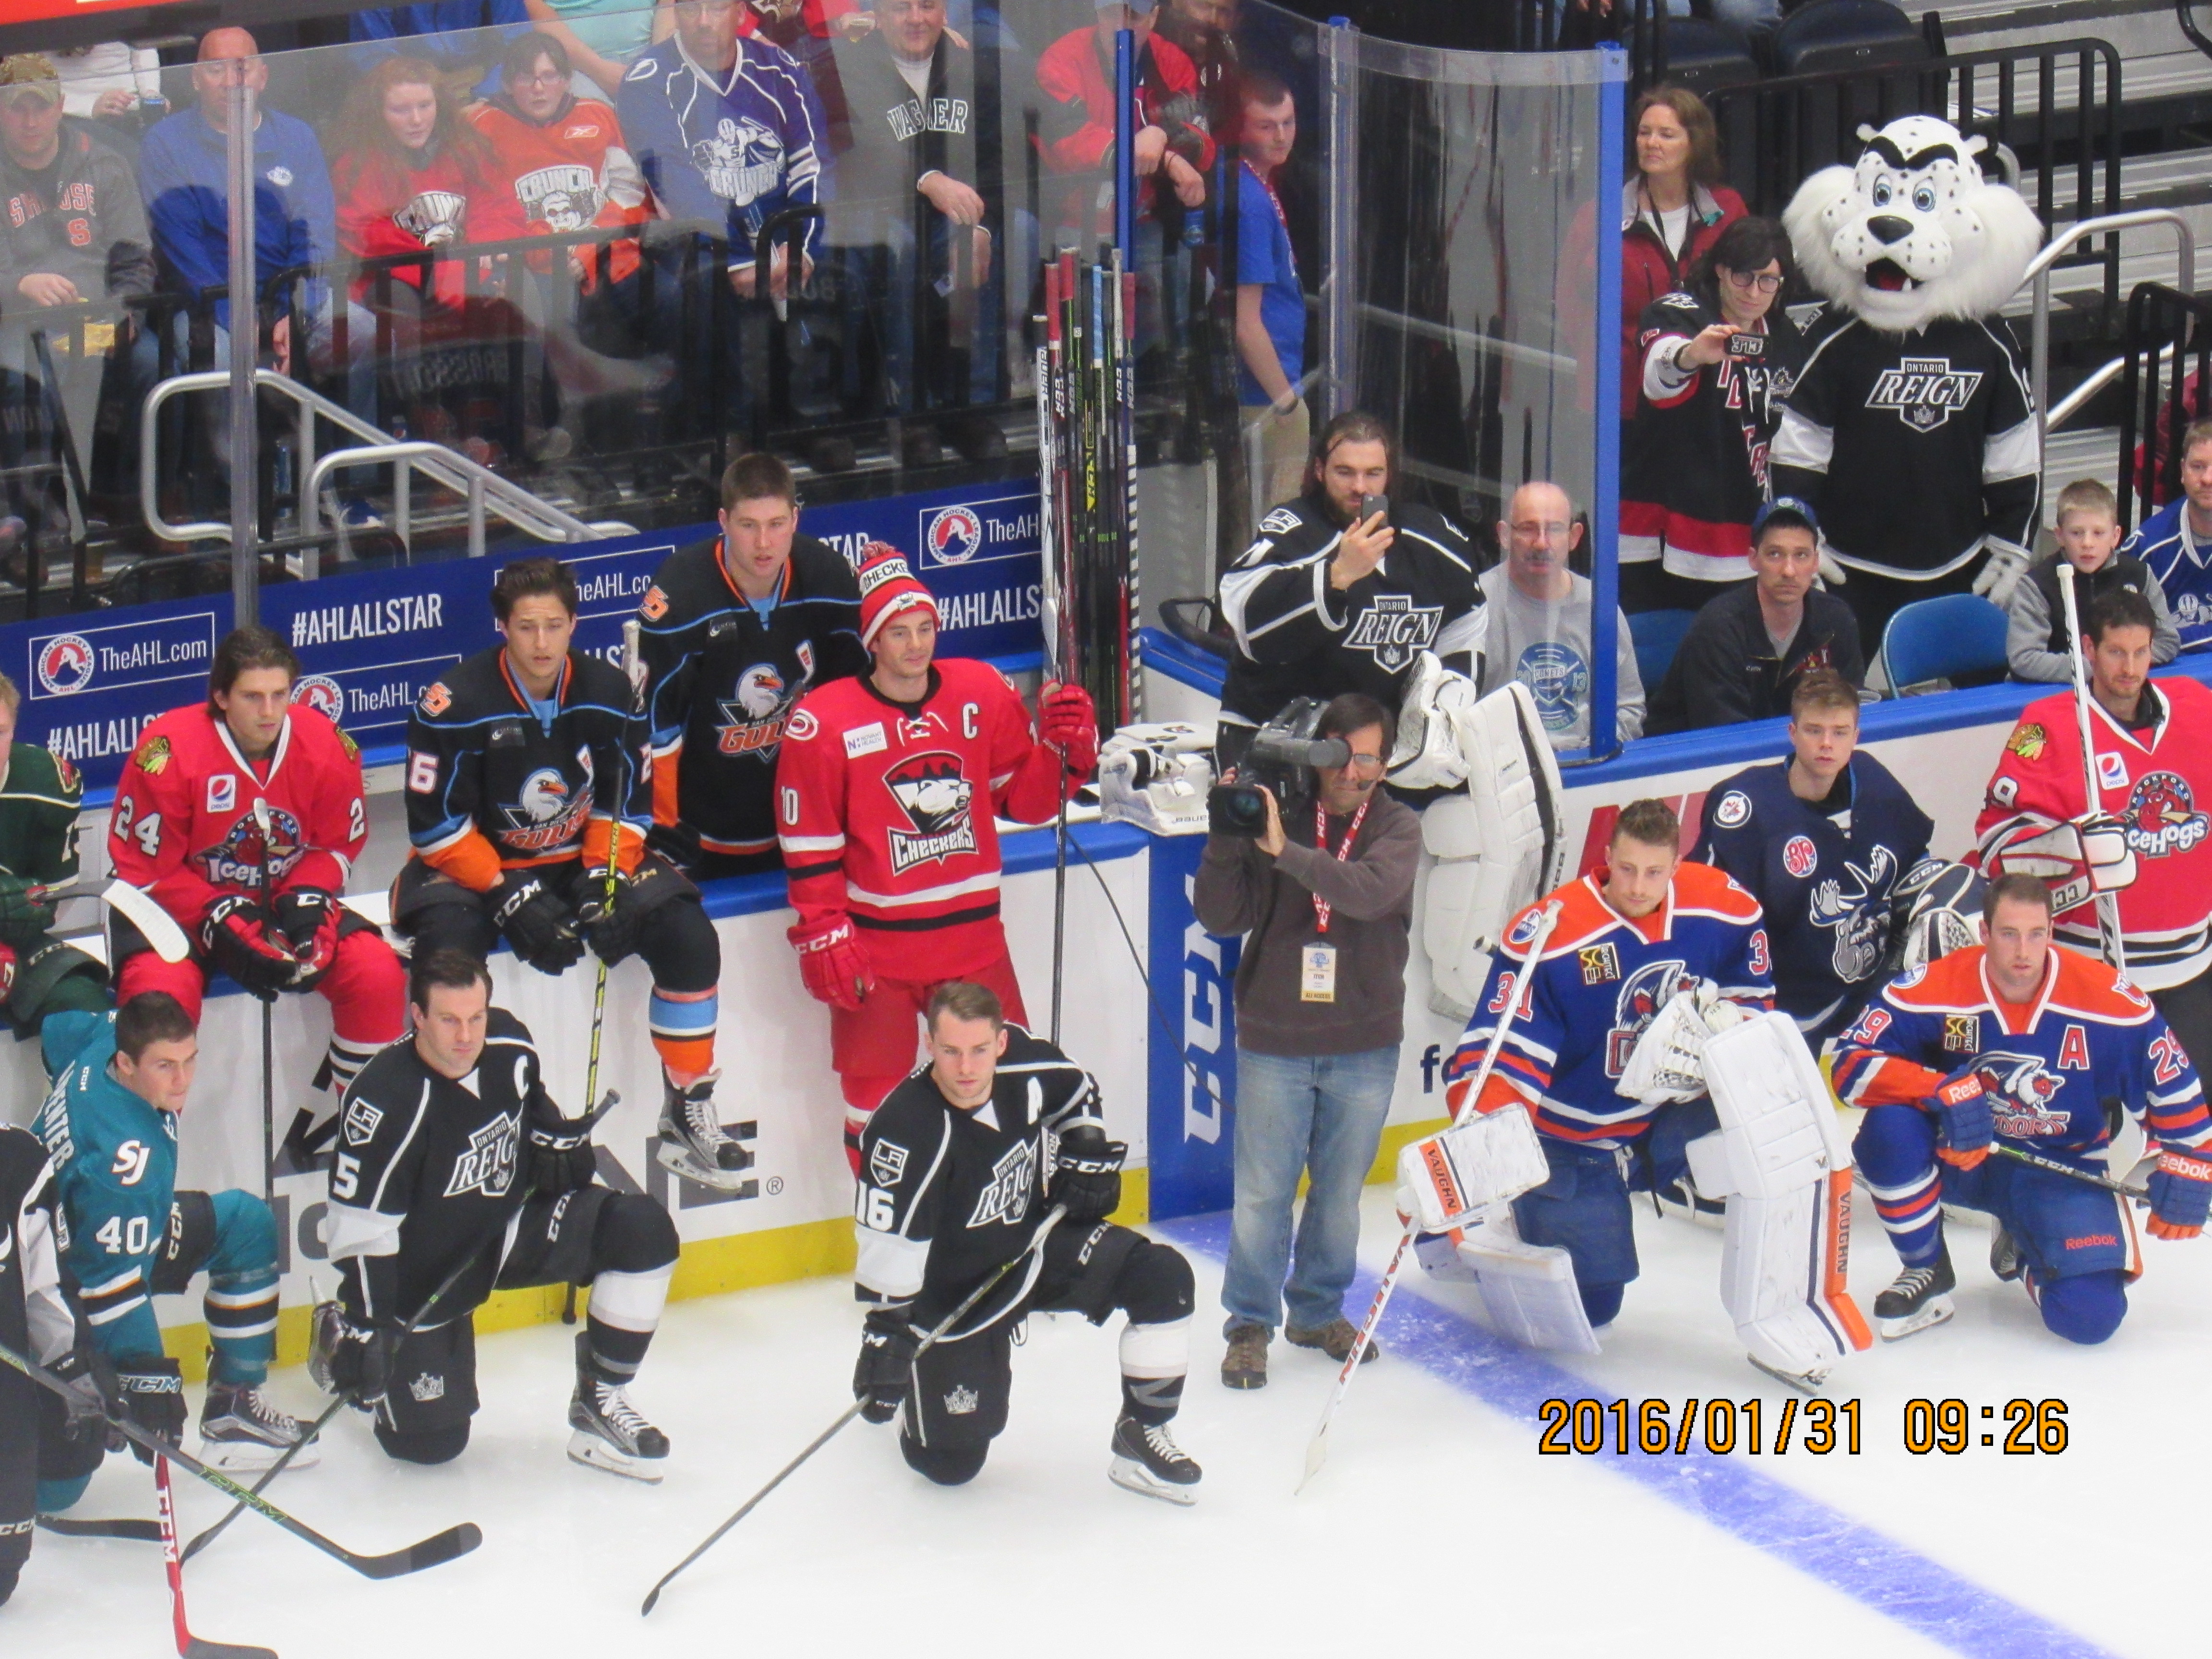 AHL Pacific Division Stars Represent At All-Star Classic - CaliSports News